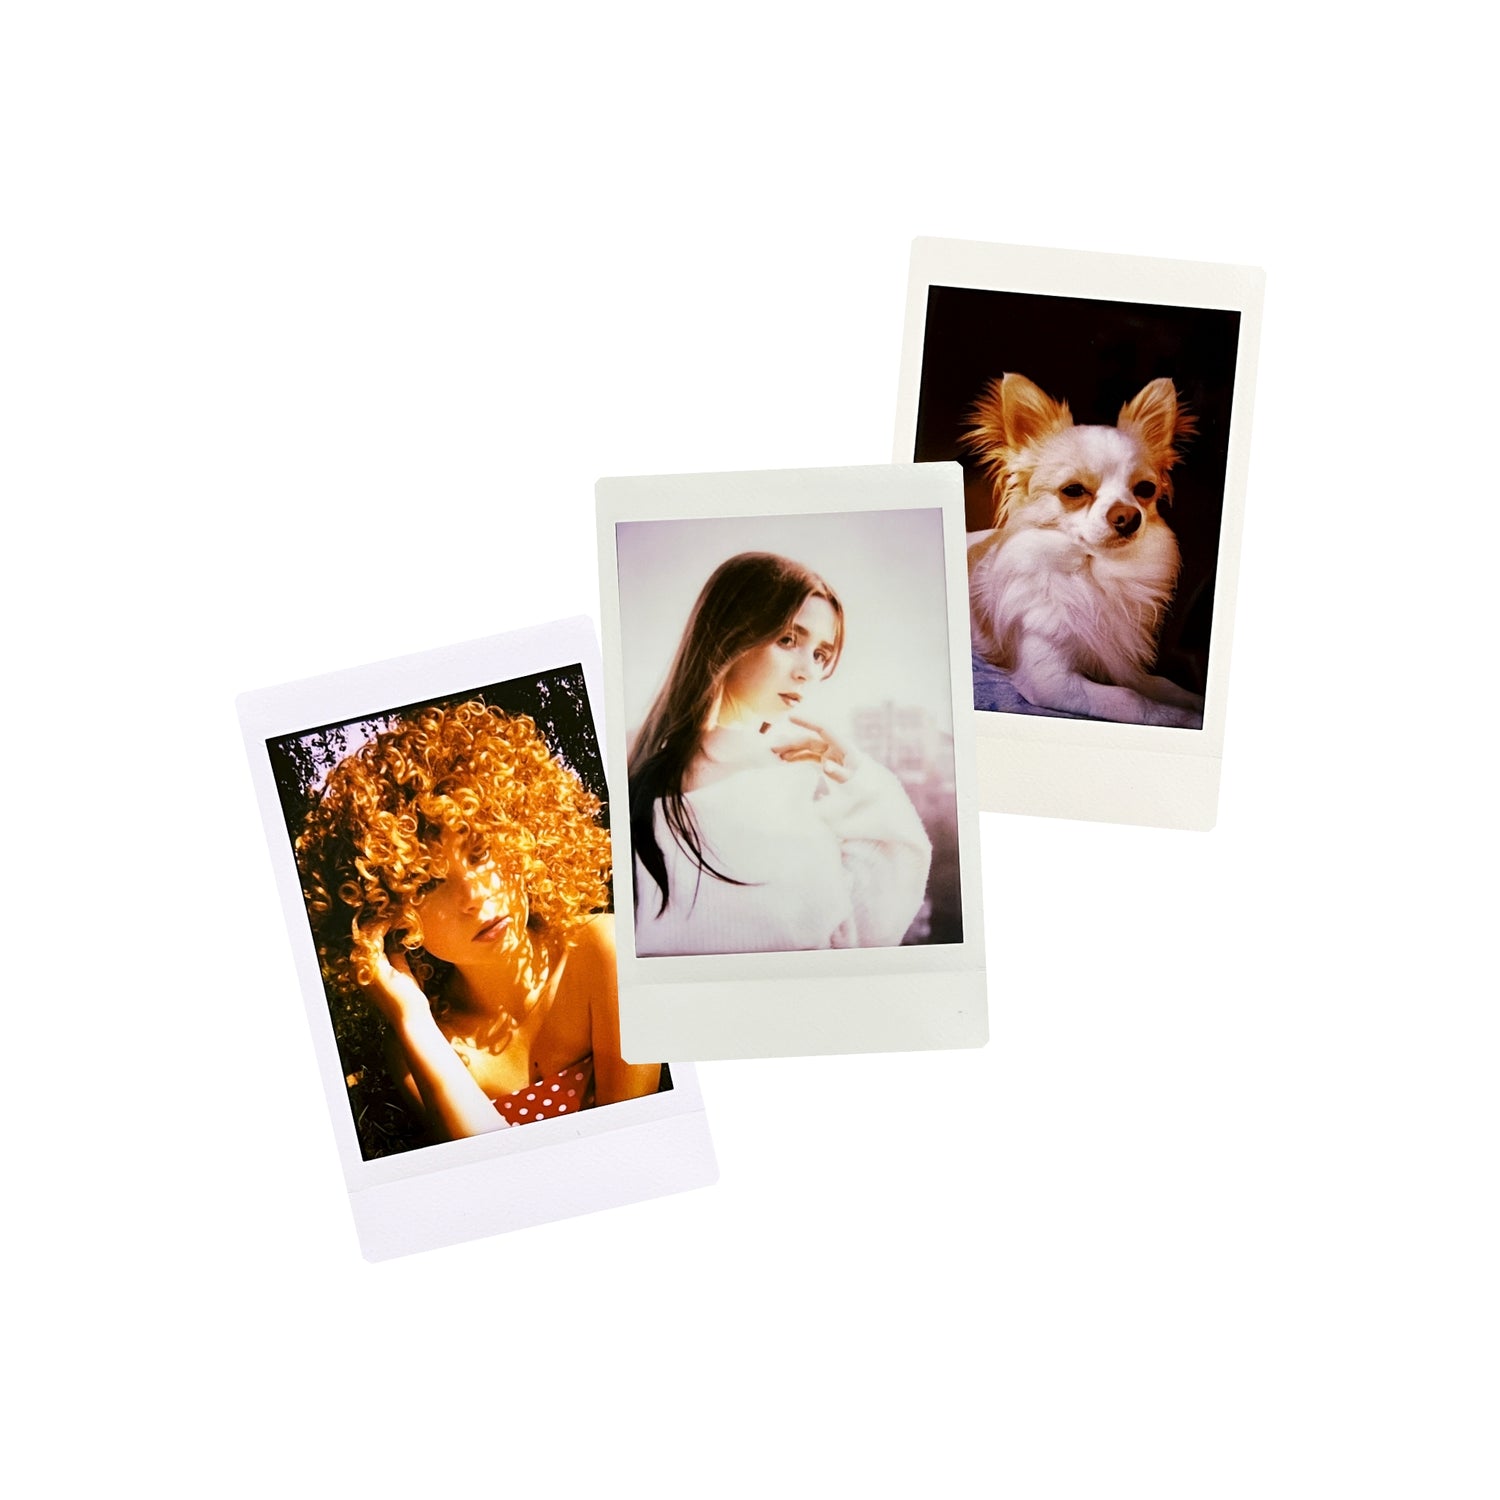 Jollylook EYE transforms digital photos from your smartphone into real-life instant prints 